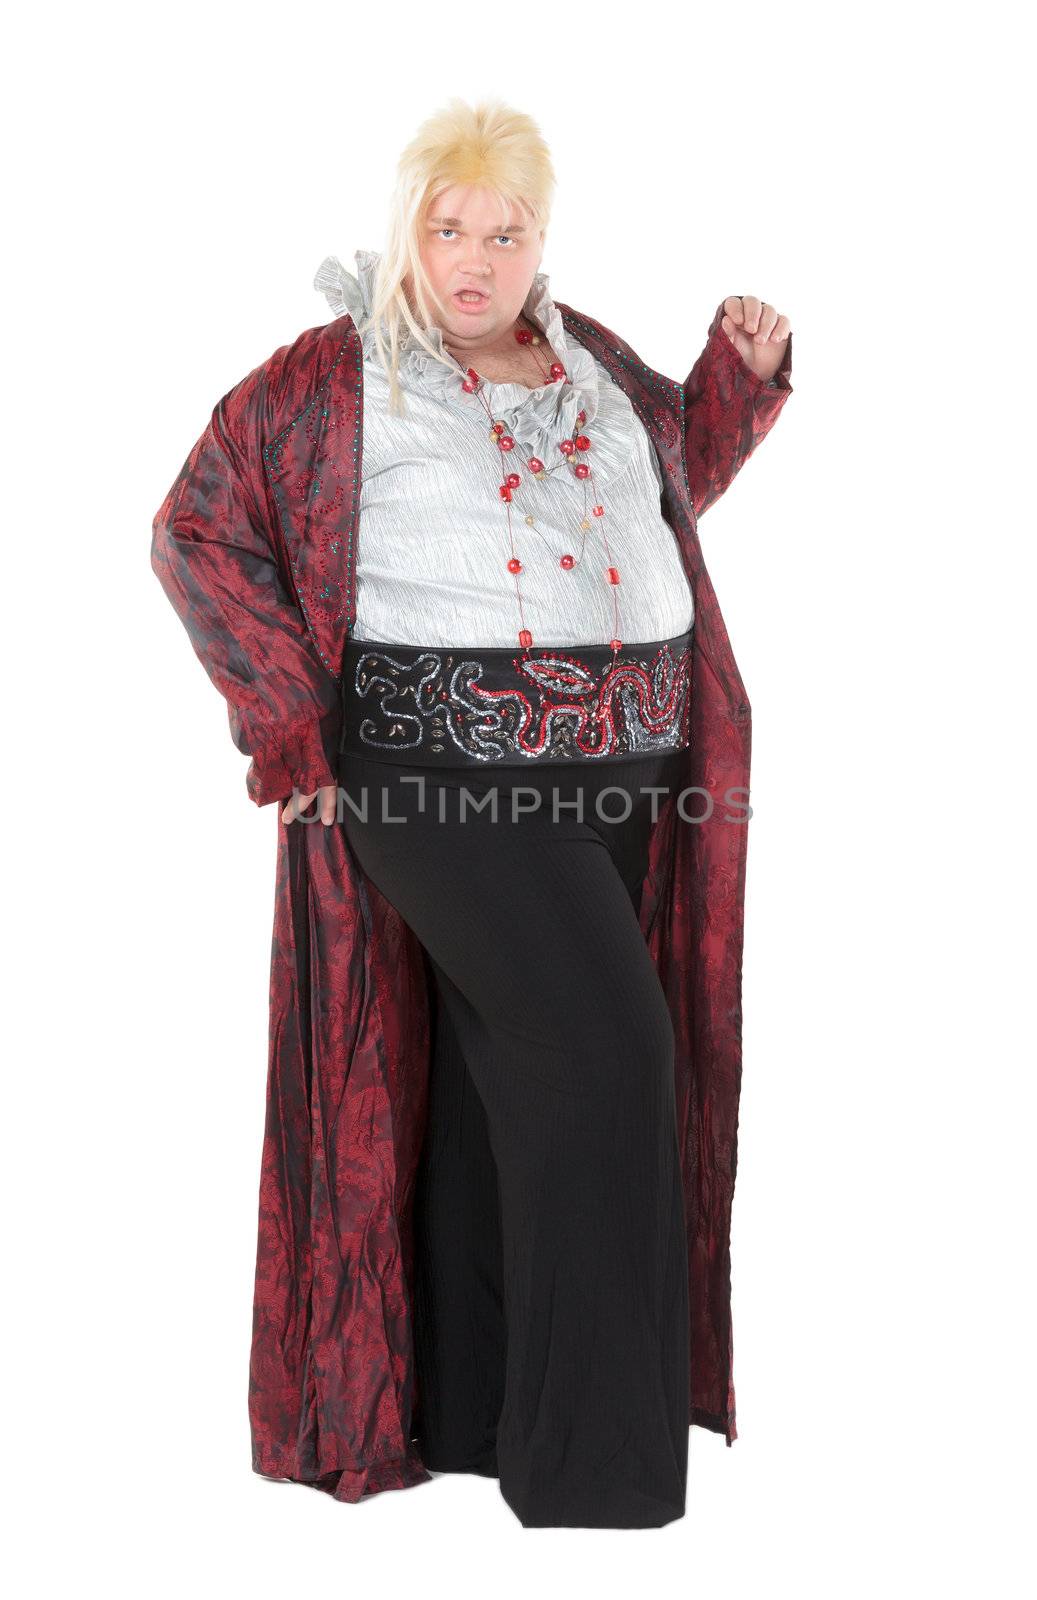 Overweight entertainer or disillusioned drag queen by Discovod